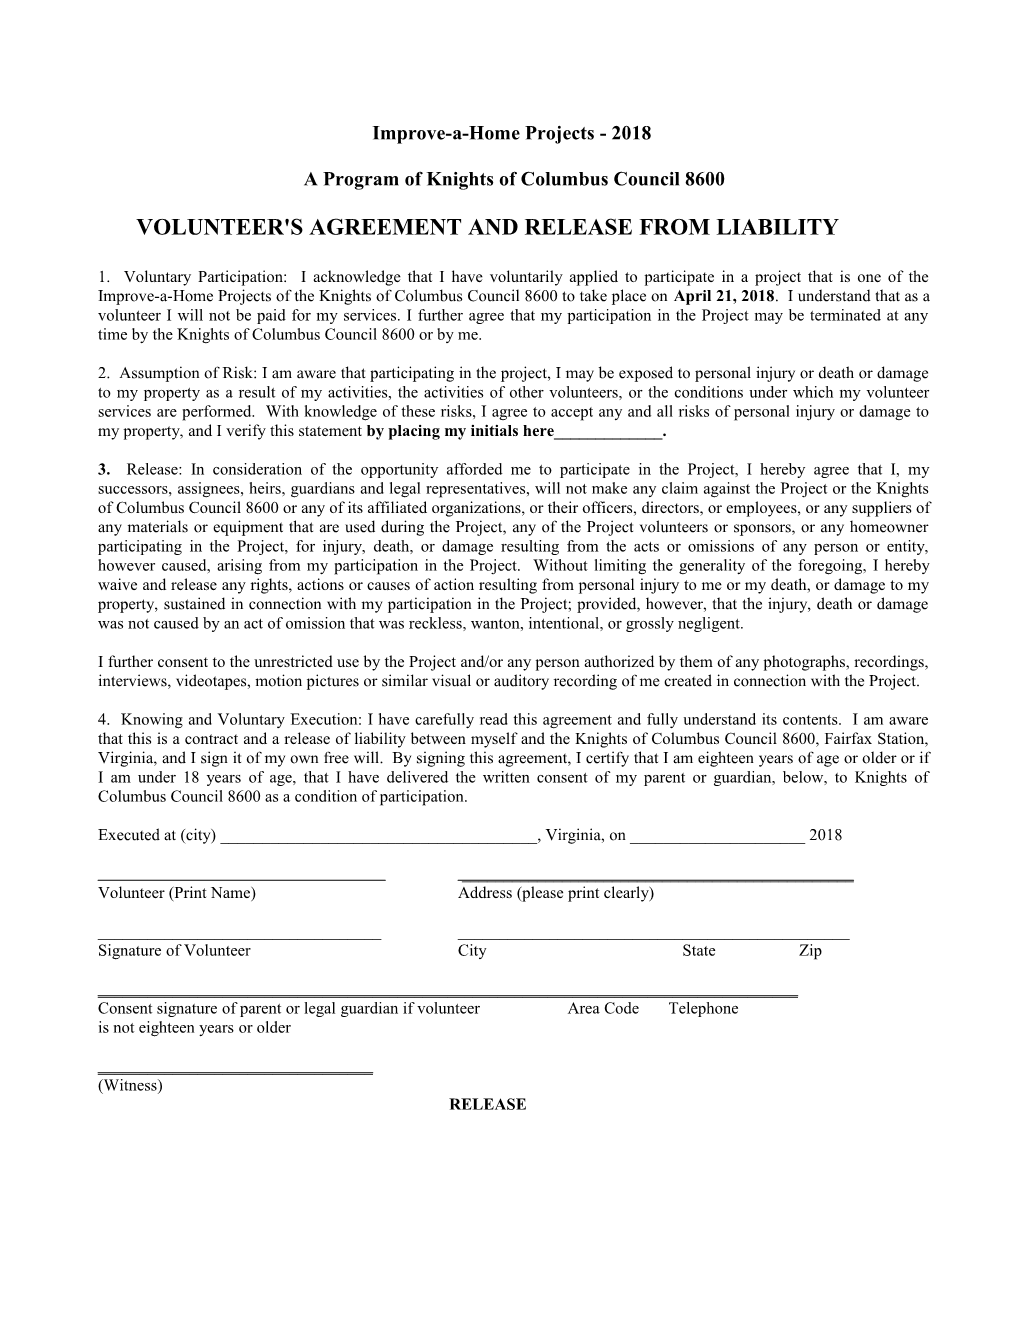 Authorization for Participating Minor Release from Liability